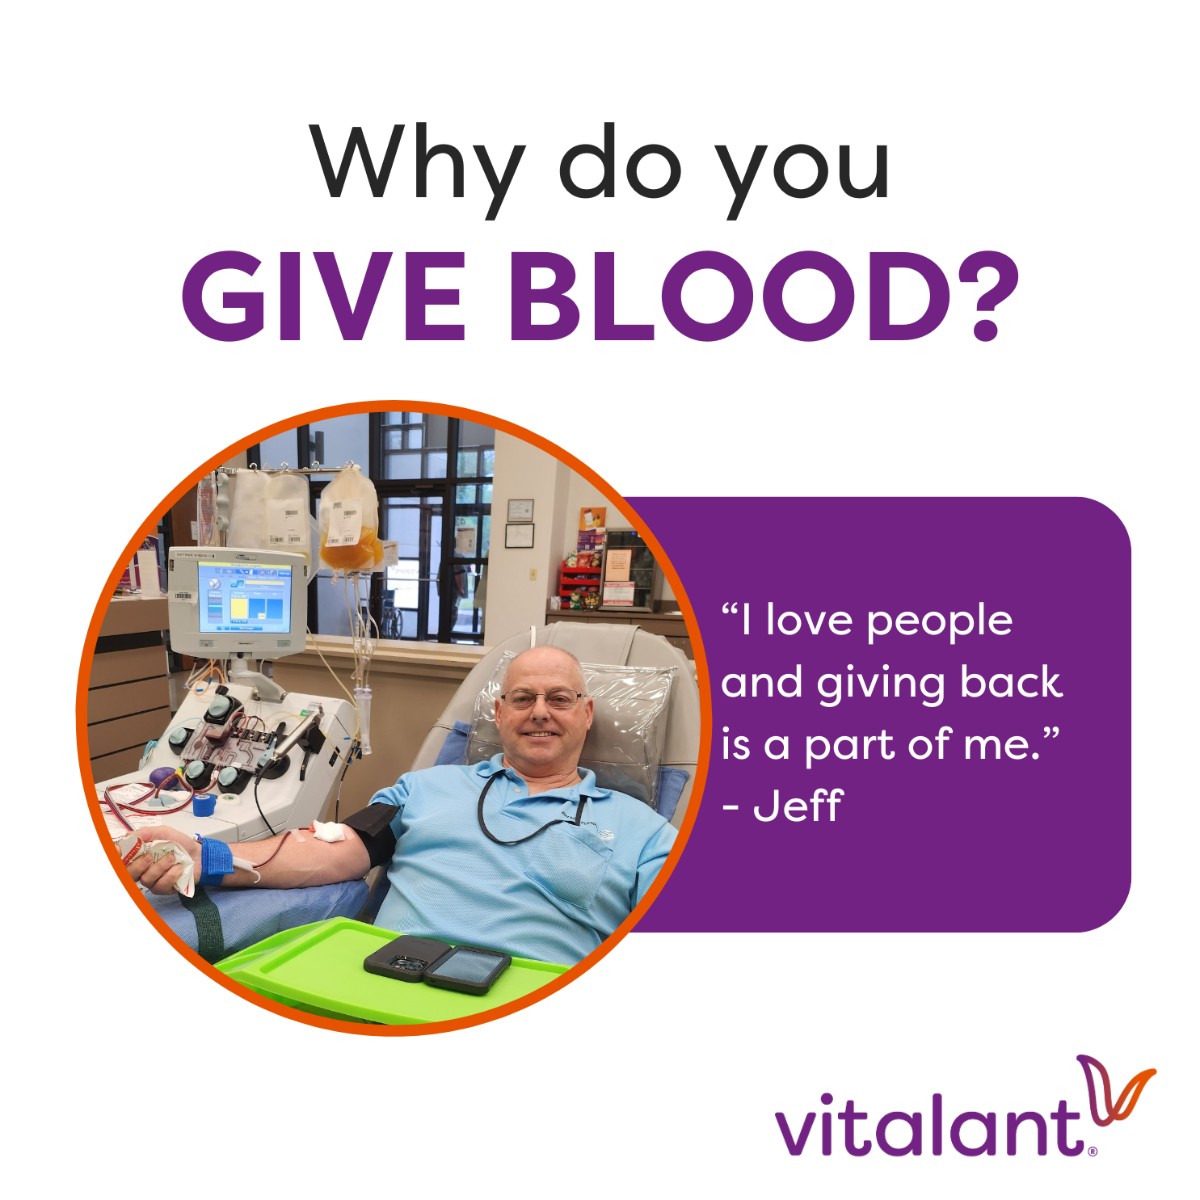 Why do you give blood?
For nearly 28 years, Jeff has been a dedicated blood donor, driven by a desire to serve others. Join donors like Jeff and make a commitment to become a dedicated blood donor and make a vital impact for patients in need. #GiveBlood: brnw.ch/21wJlSj